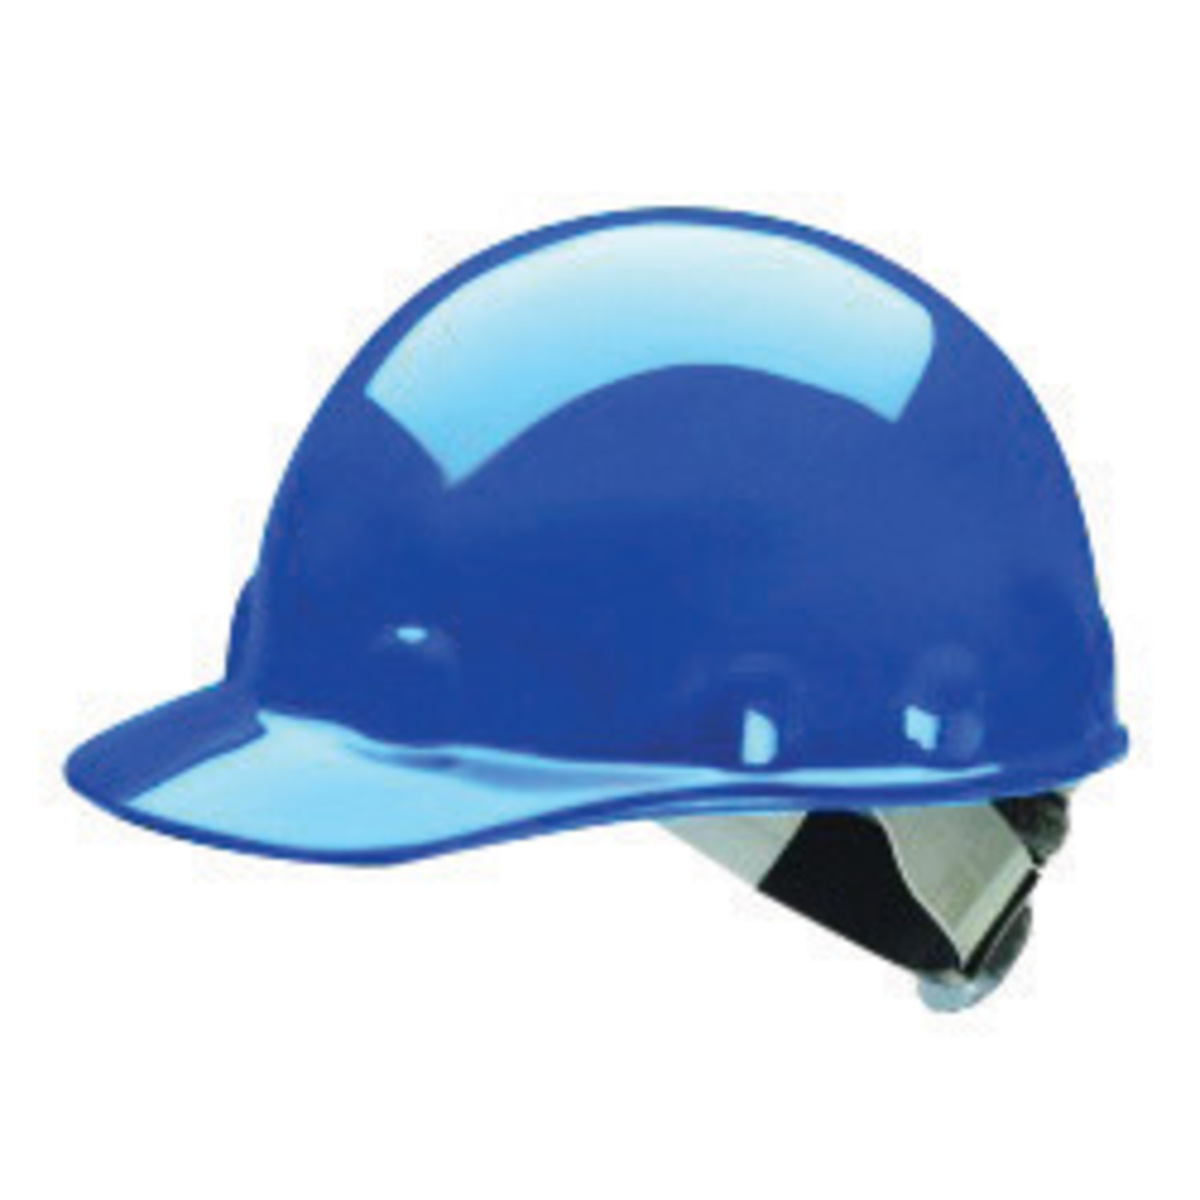 Honeywell Blue Fibre-Metal® E2 Thermoplastic Cap Style Hard Hat With Rachet/8 Point Swingstrap Ratchet Suspension